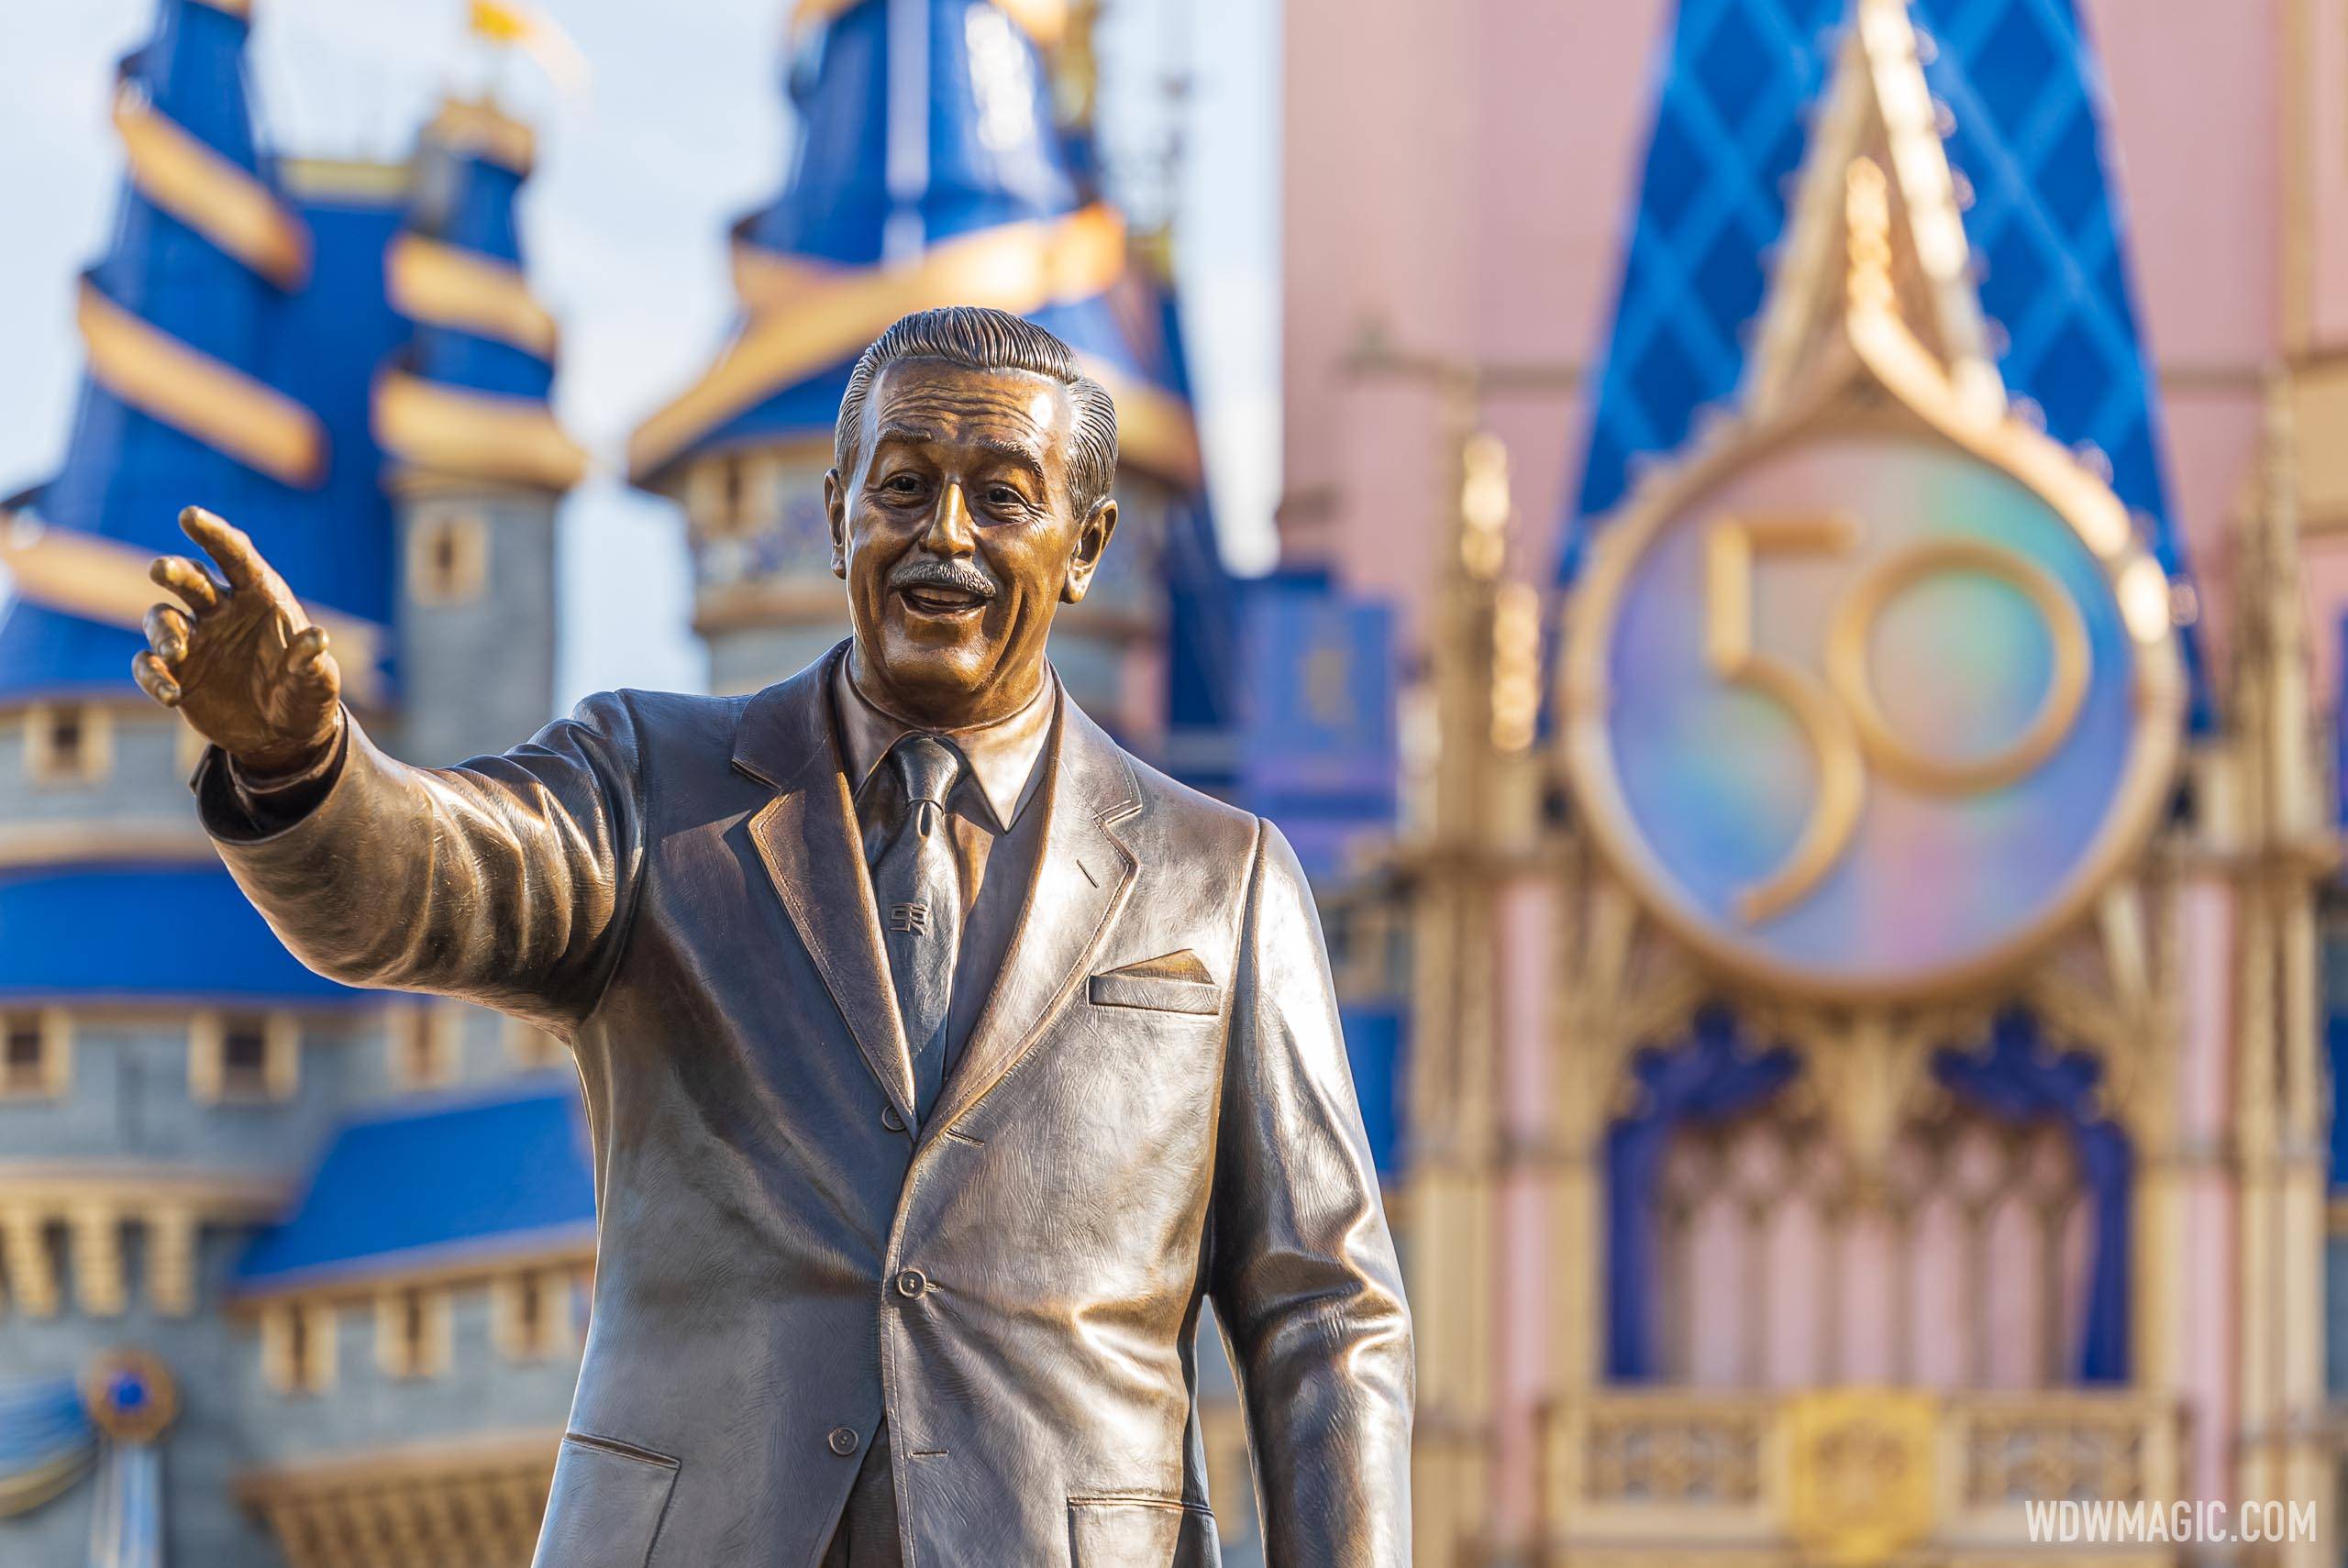 Magic Kingdom is the most expensive Disney World park to visit